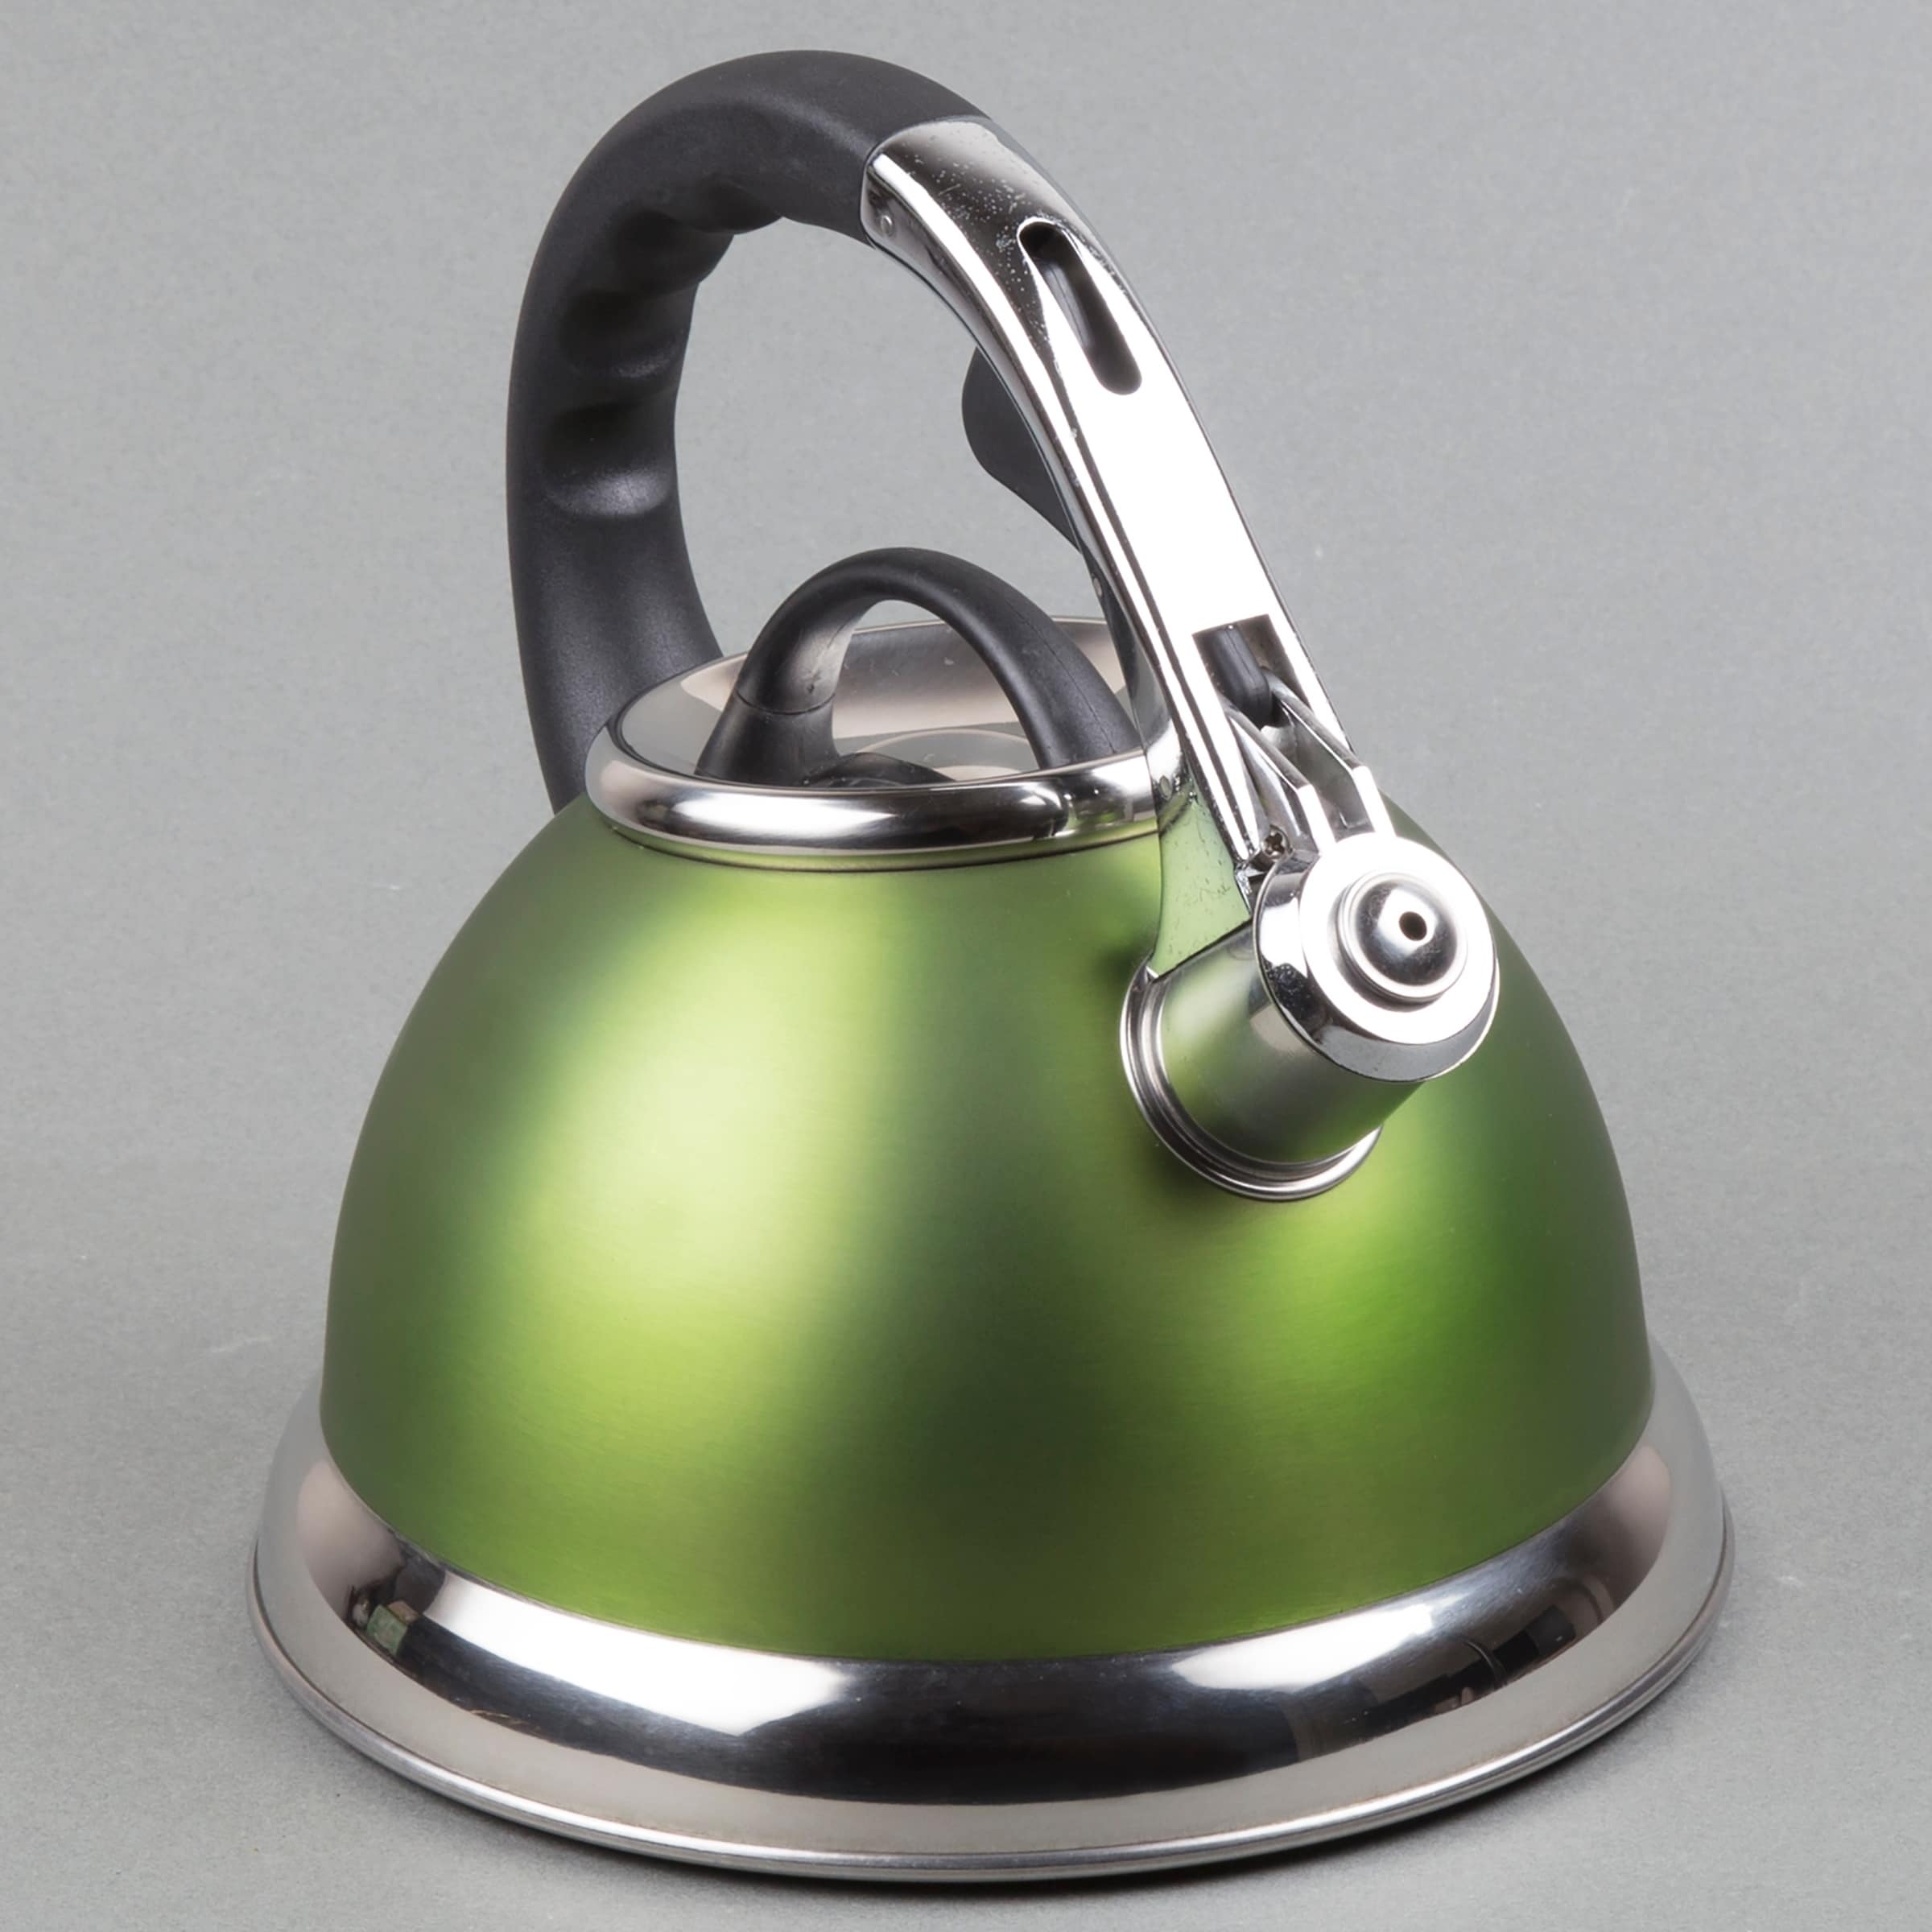 https://ak1.ostkcdn.com/images/products/10669169/Creative-Home-Camille-3.0-quart-Whistling-Stainless-Steel-Opaque-Chartreuse-Tea-Kettle-684c34cc-8213-4ec3-9b6a-7a1067323a64.jpg